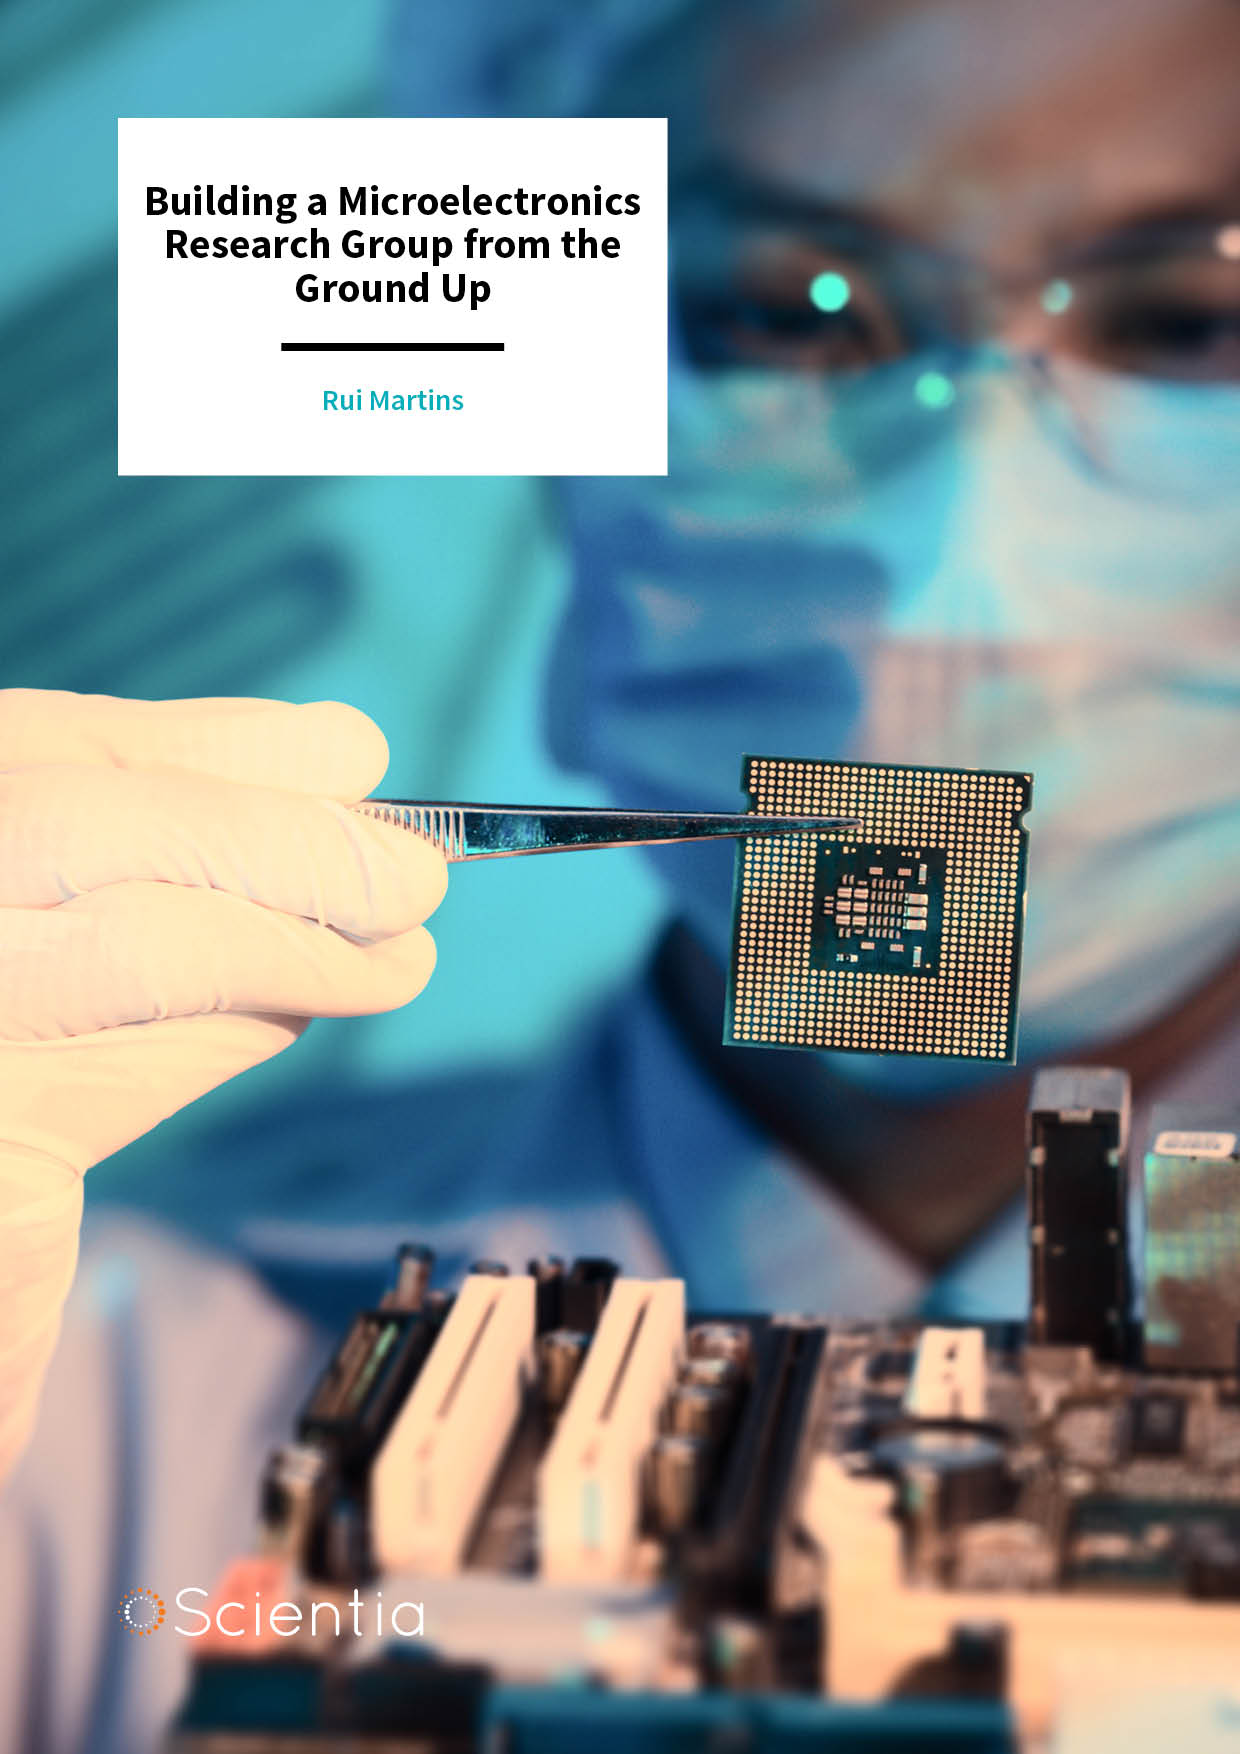 Professor Rui Martins | Building a Microelectronics Research Group from the Ground Up